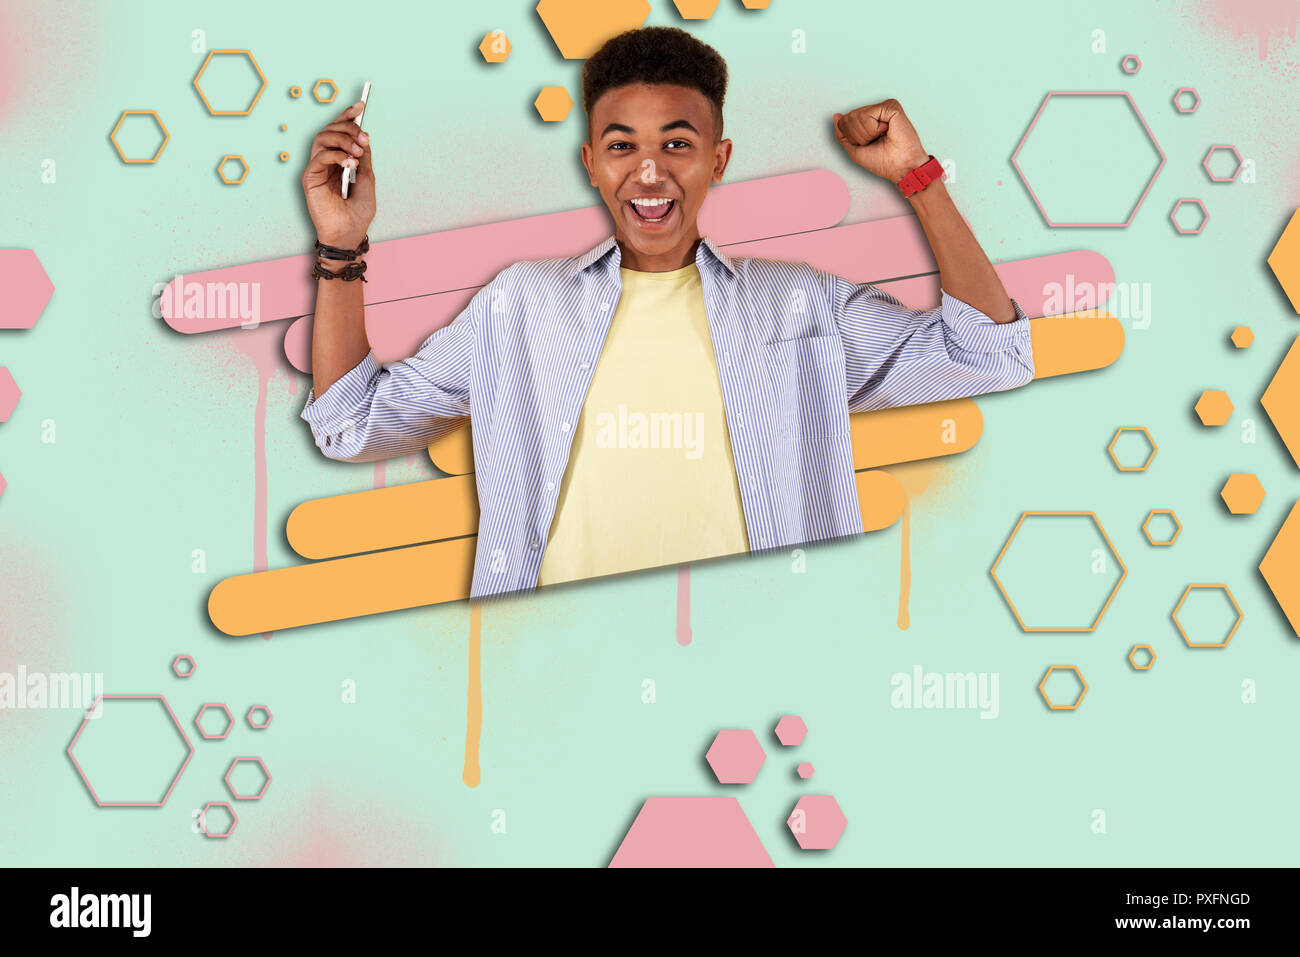 Happy mulatto boy feeling extremely cheerful after winning prize in online game Stock Photo